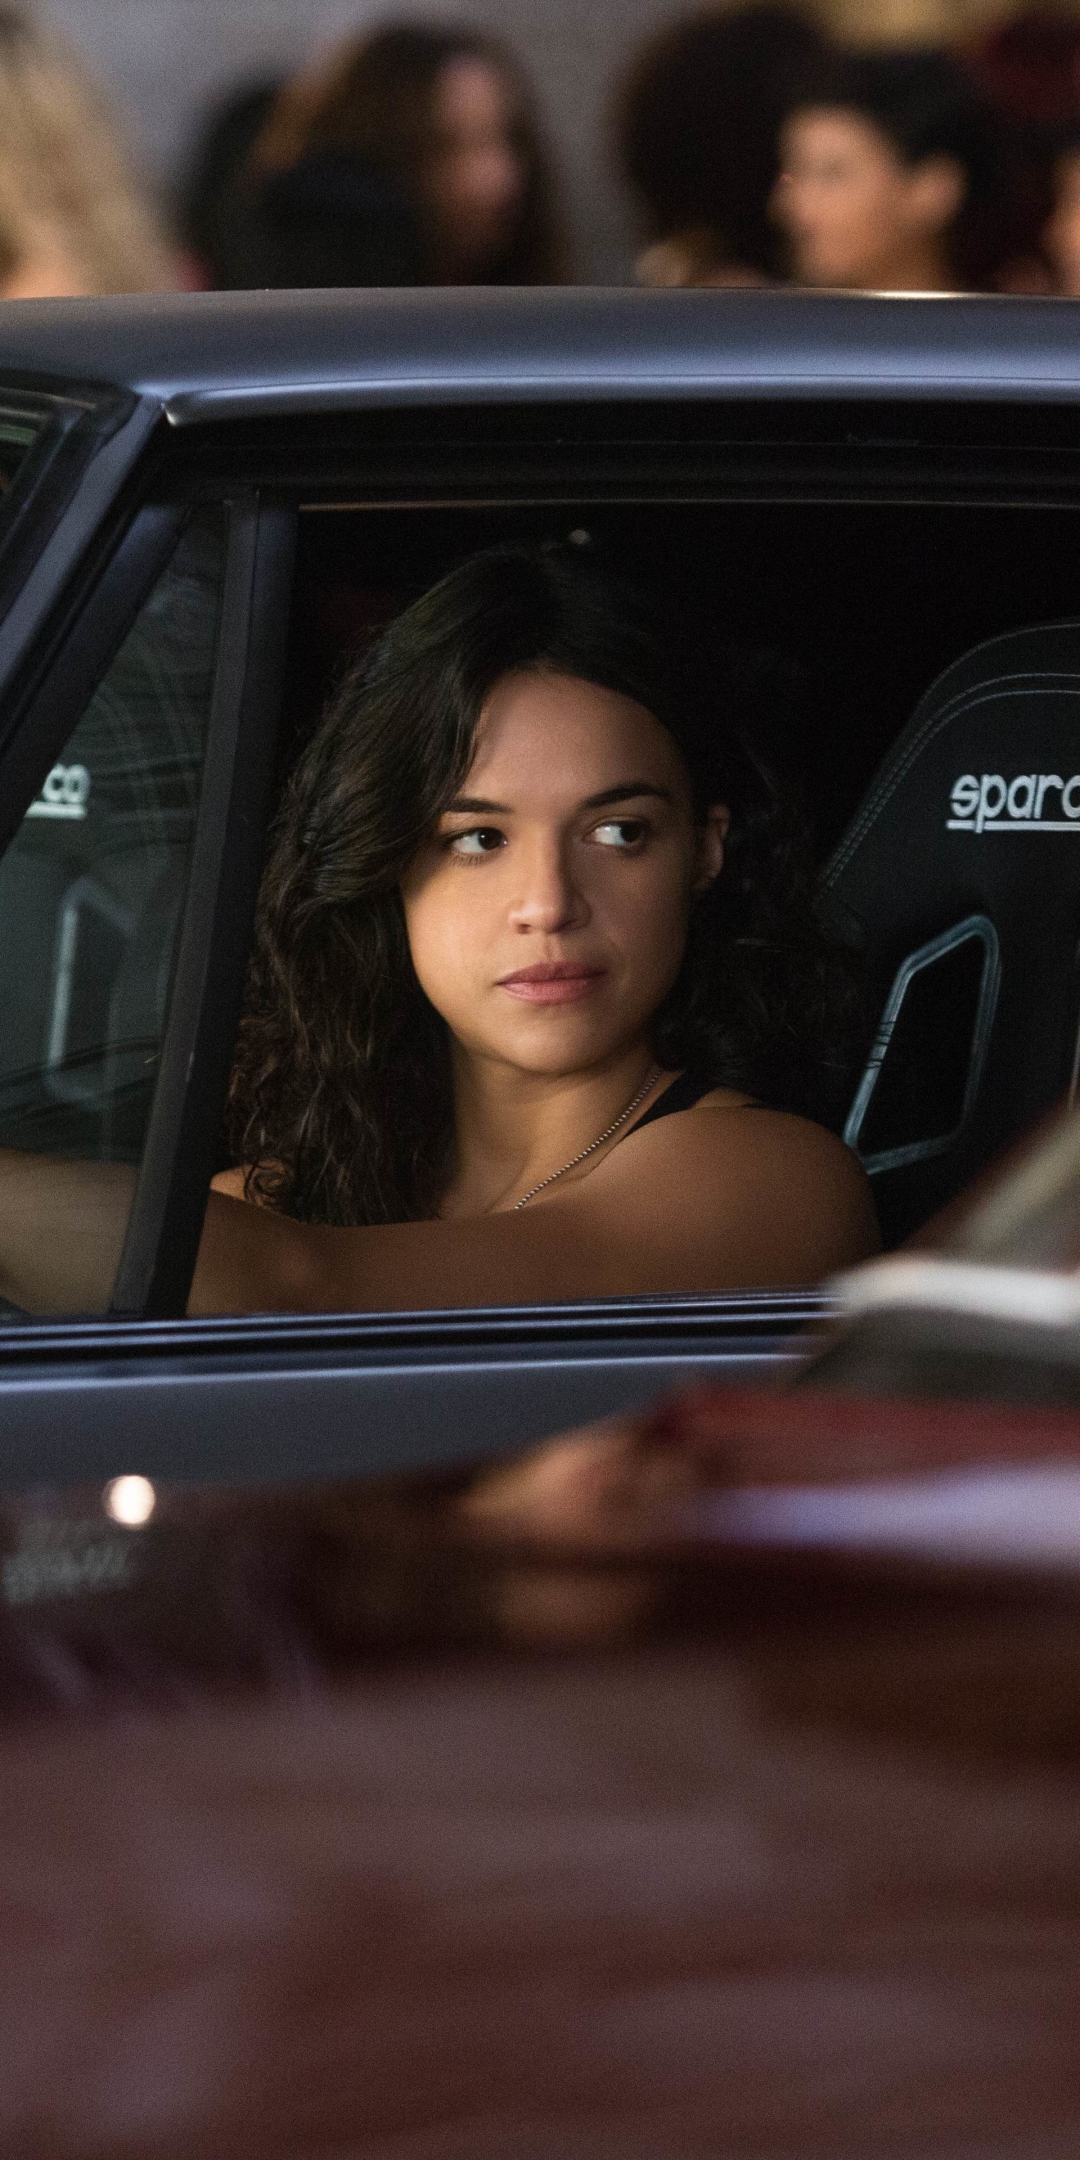 movie, fast & furious 6, letty ortiz, michelle rodriguez, fast & furious